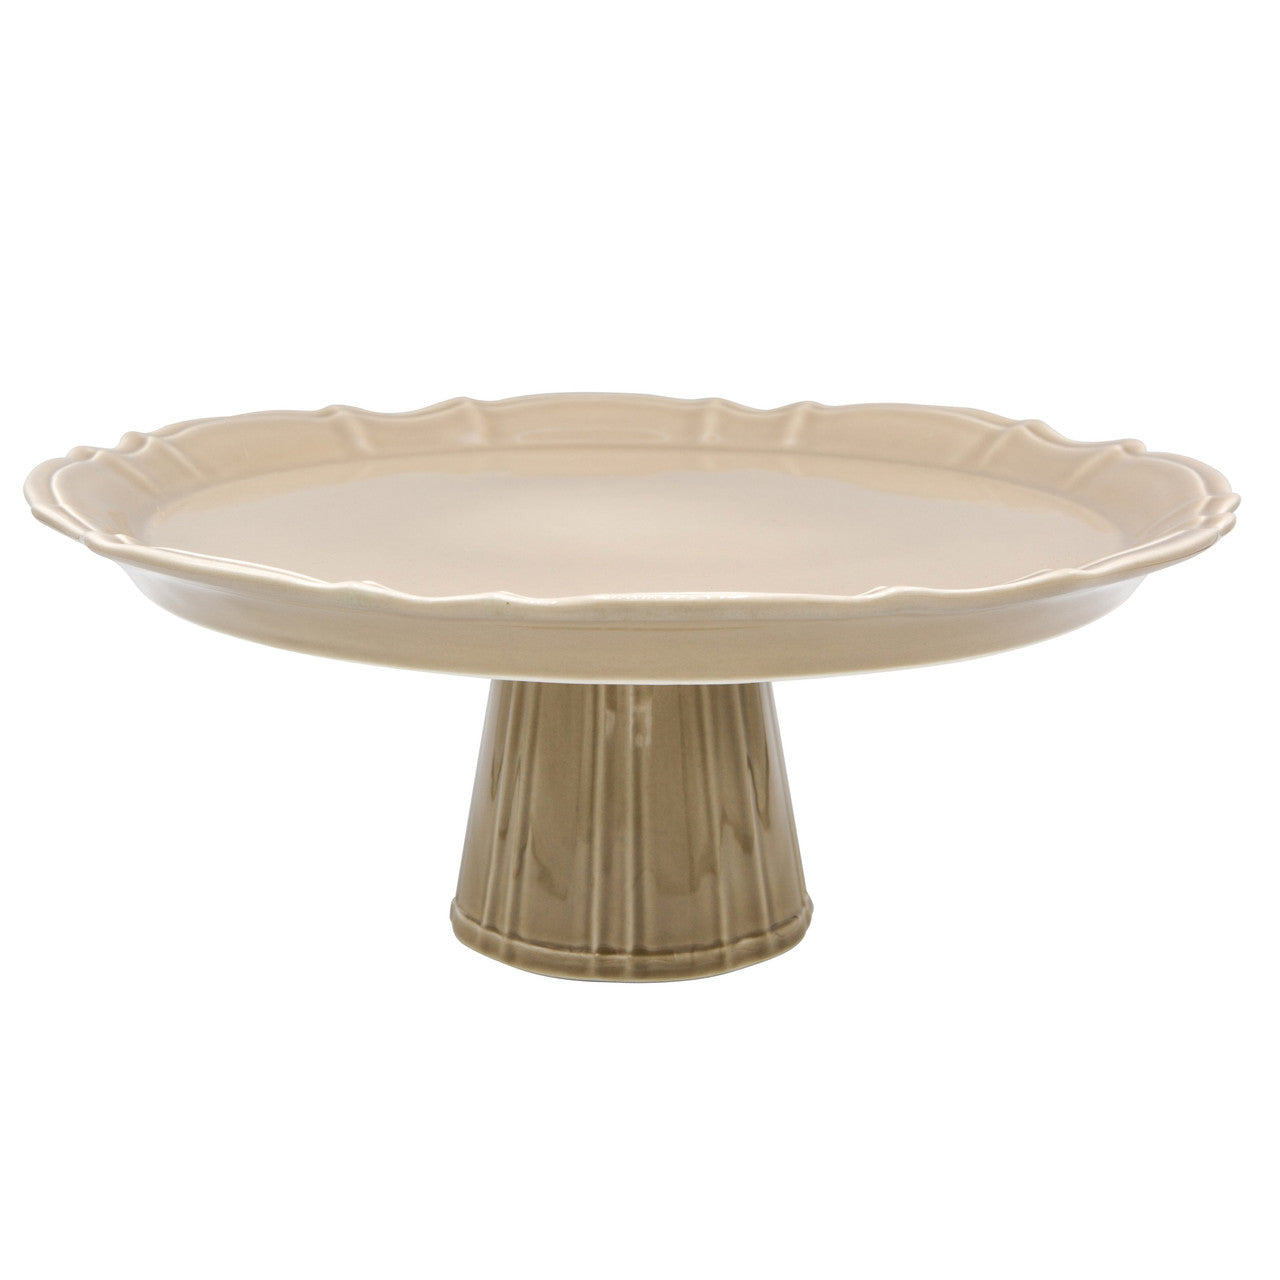 Chloe 13.5" Footed Cake Plate - Taupe